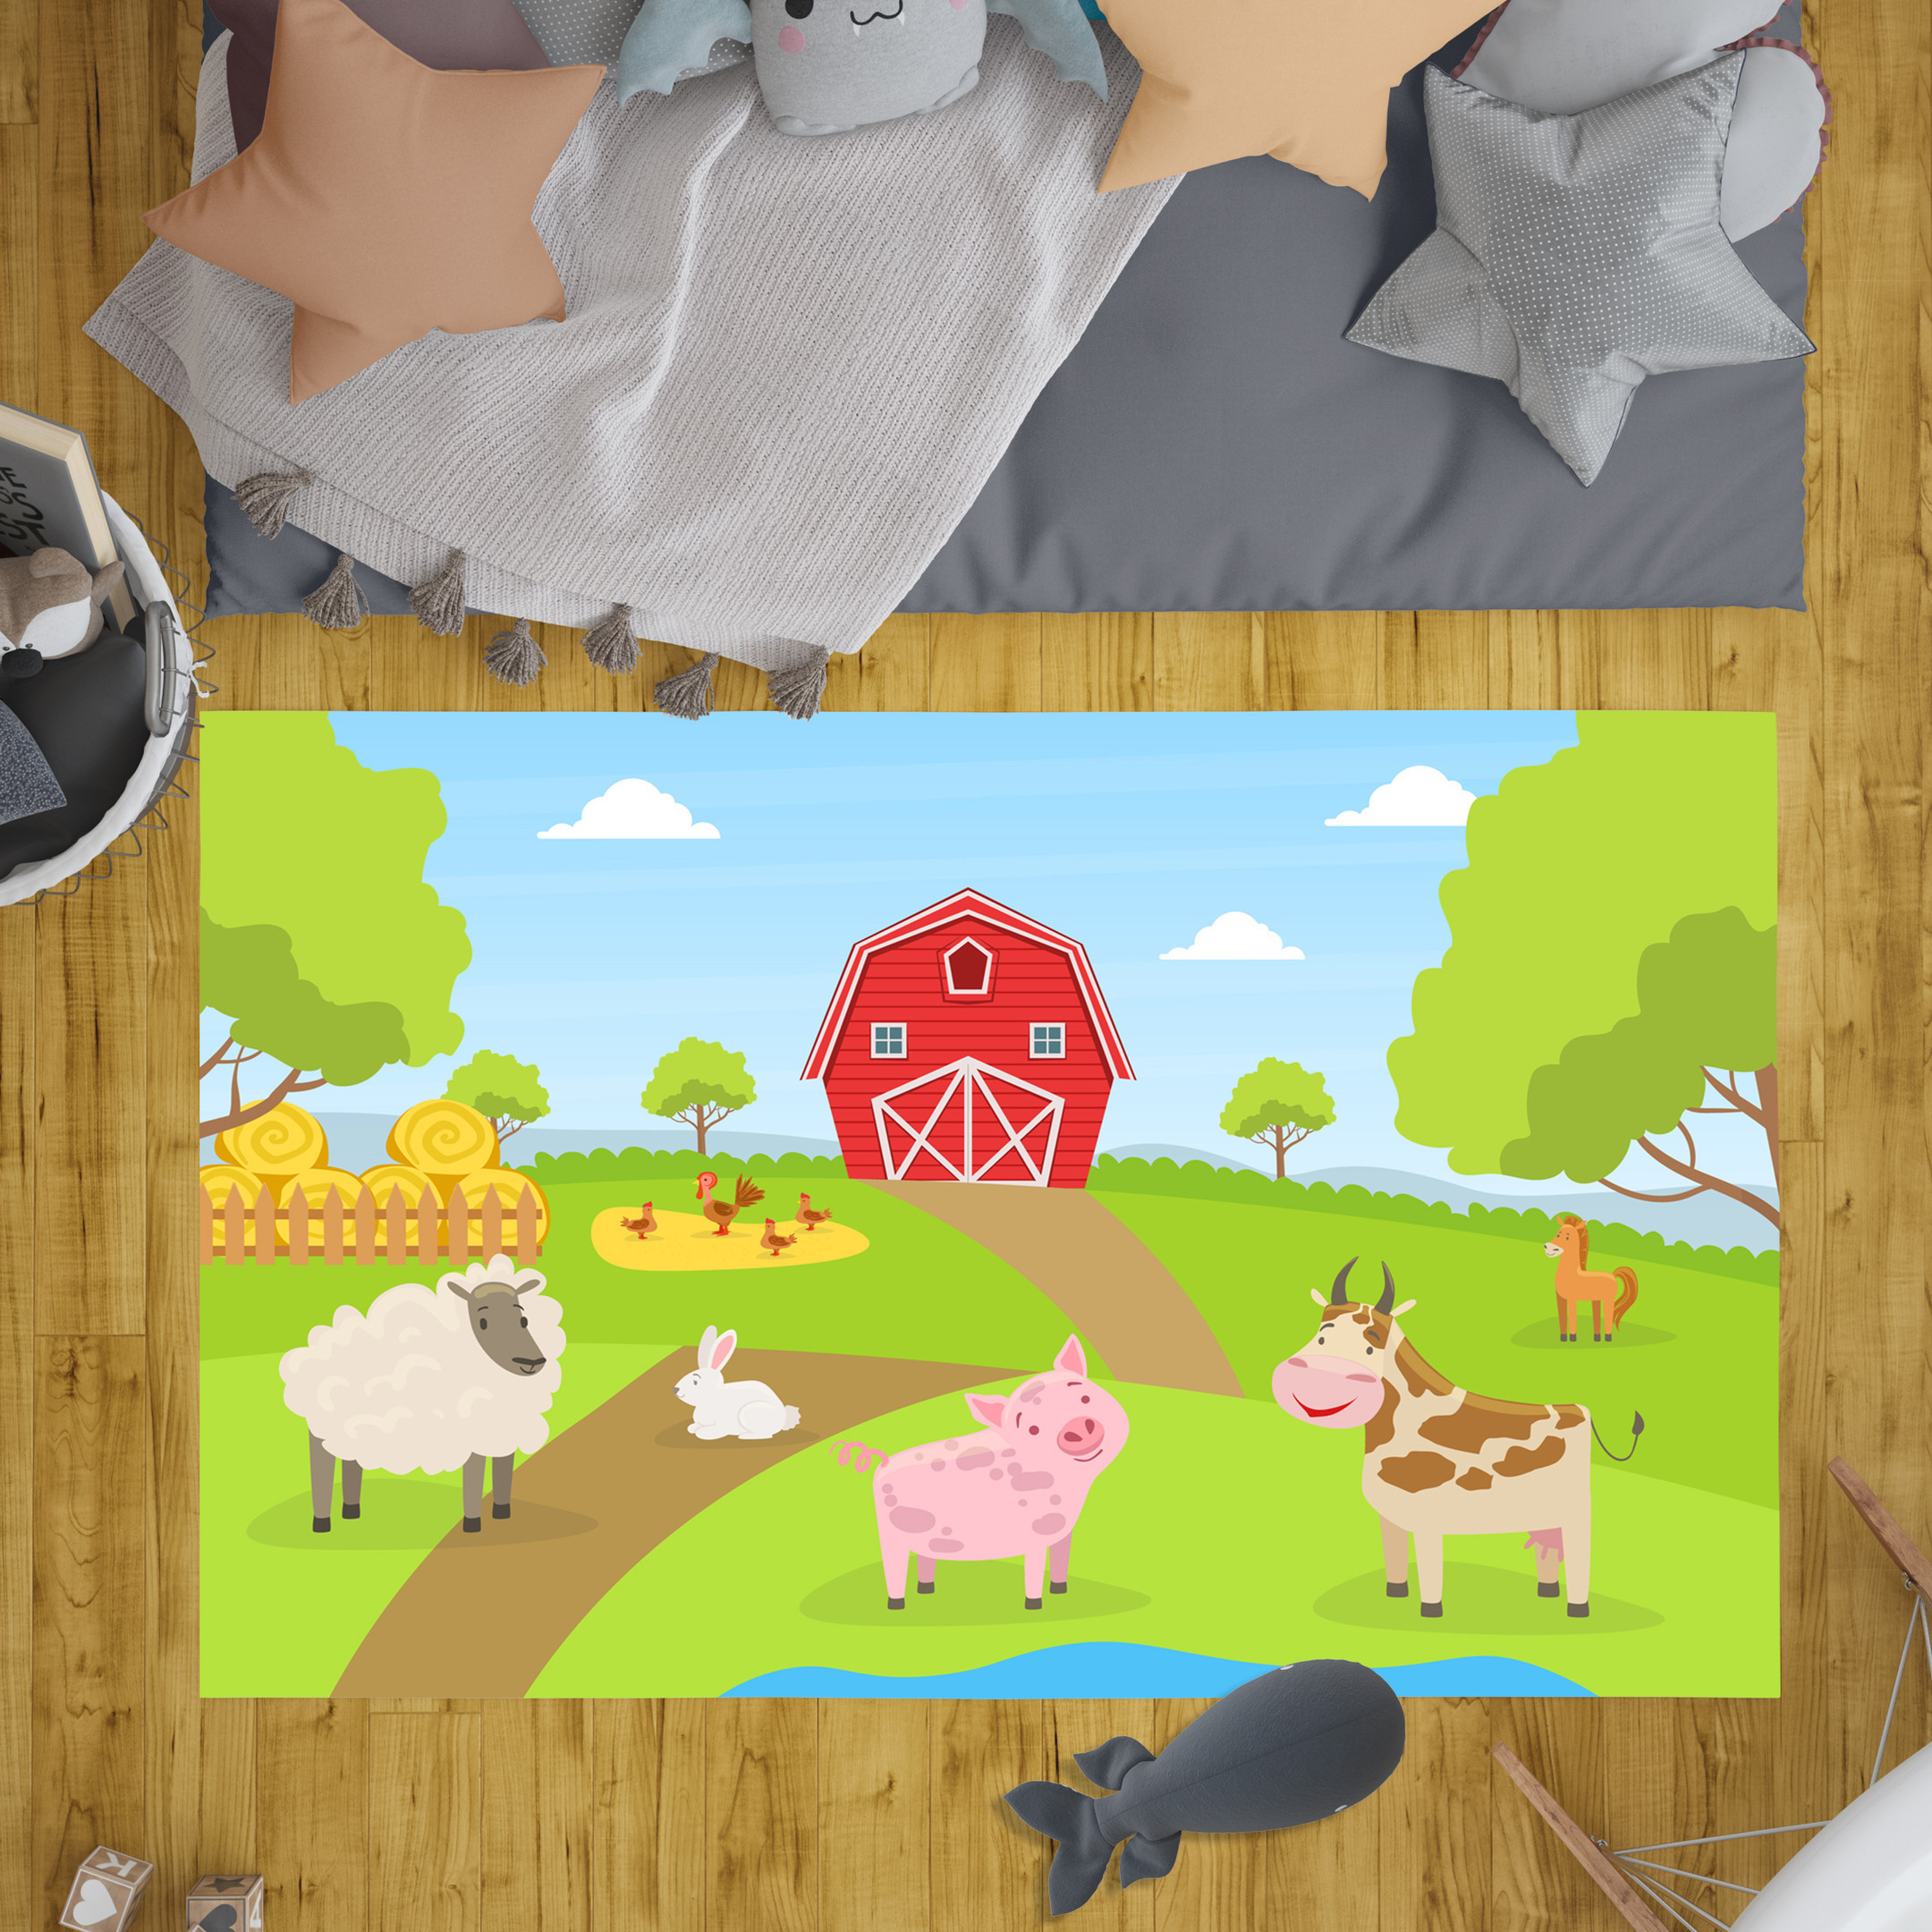 Beautiful Summer Rural Landscape With Green Field Red Barn Farm Animals Cow Pig Sheep Rabbit Farm Rug Carpet For Kids Room